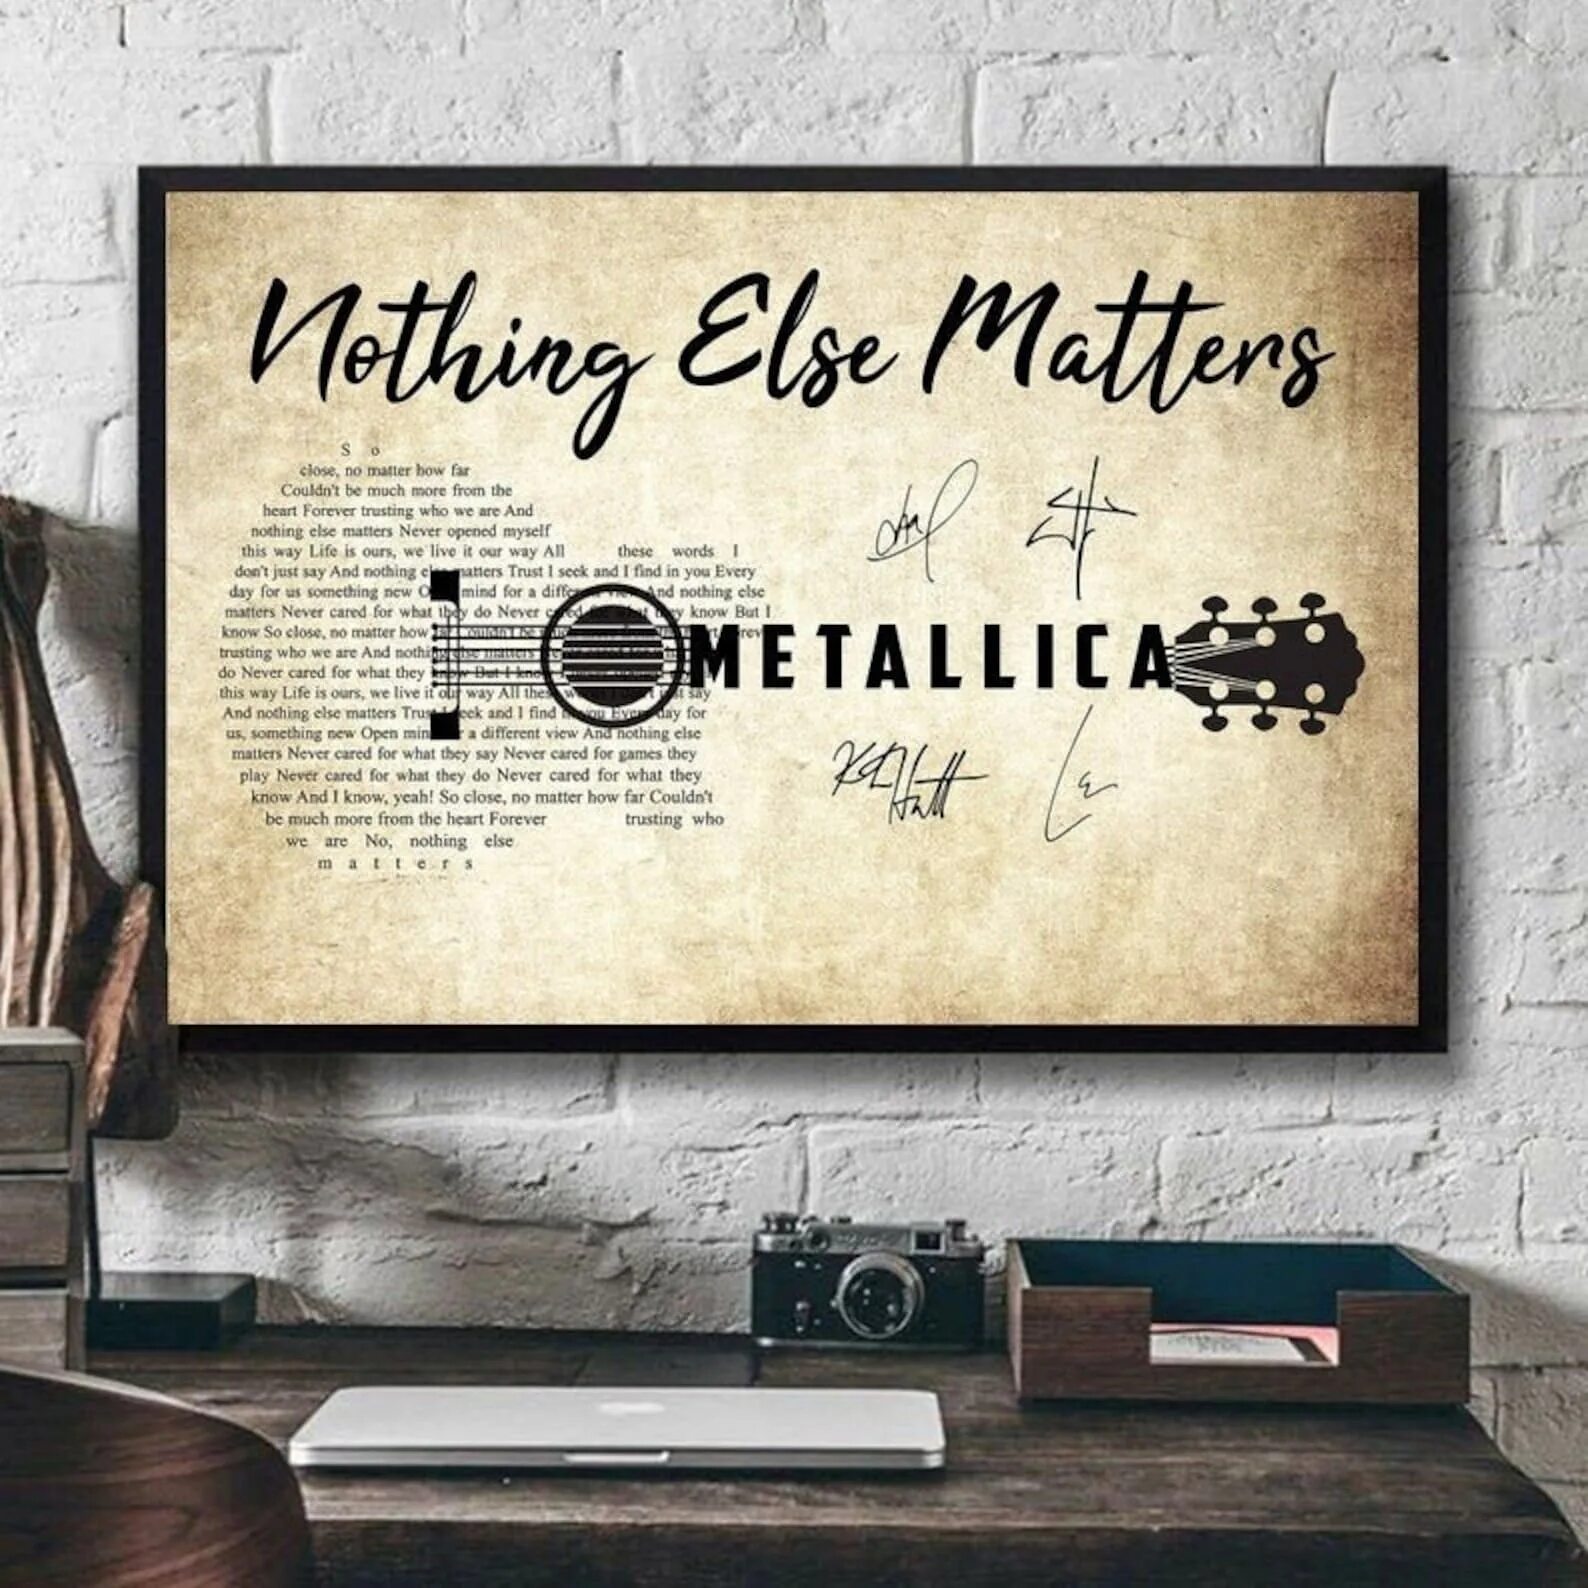 Metallica matters текст. Nothing else matters. Metallica nothing else matters. Металлика nothing. Metallica nothing else matters текст.